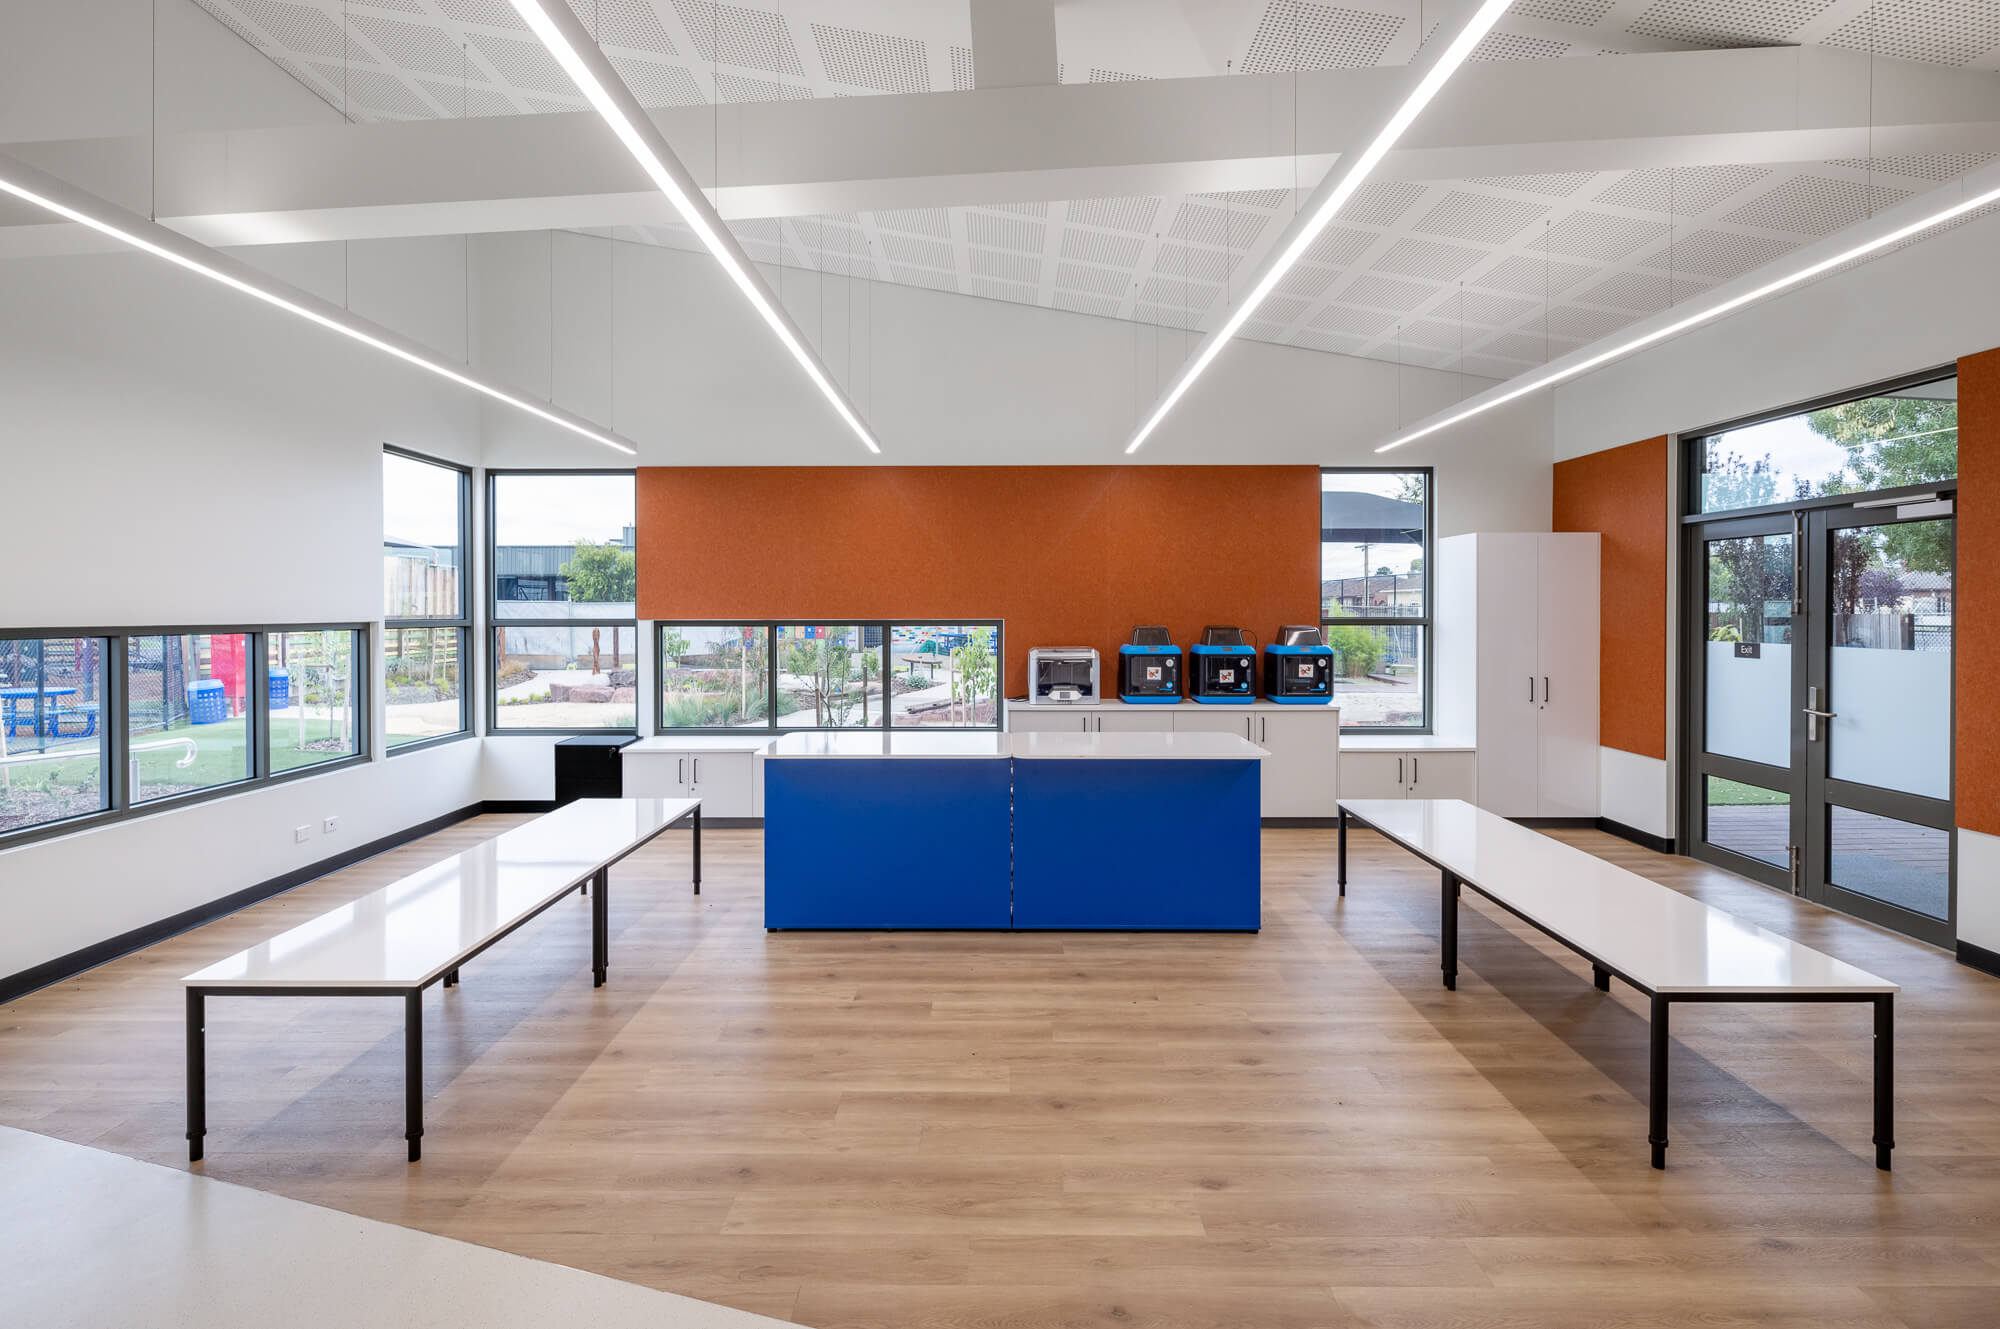 Wet area classroom with windows all around at student height, feature orange wall treatment